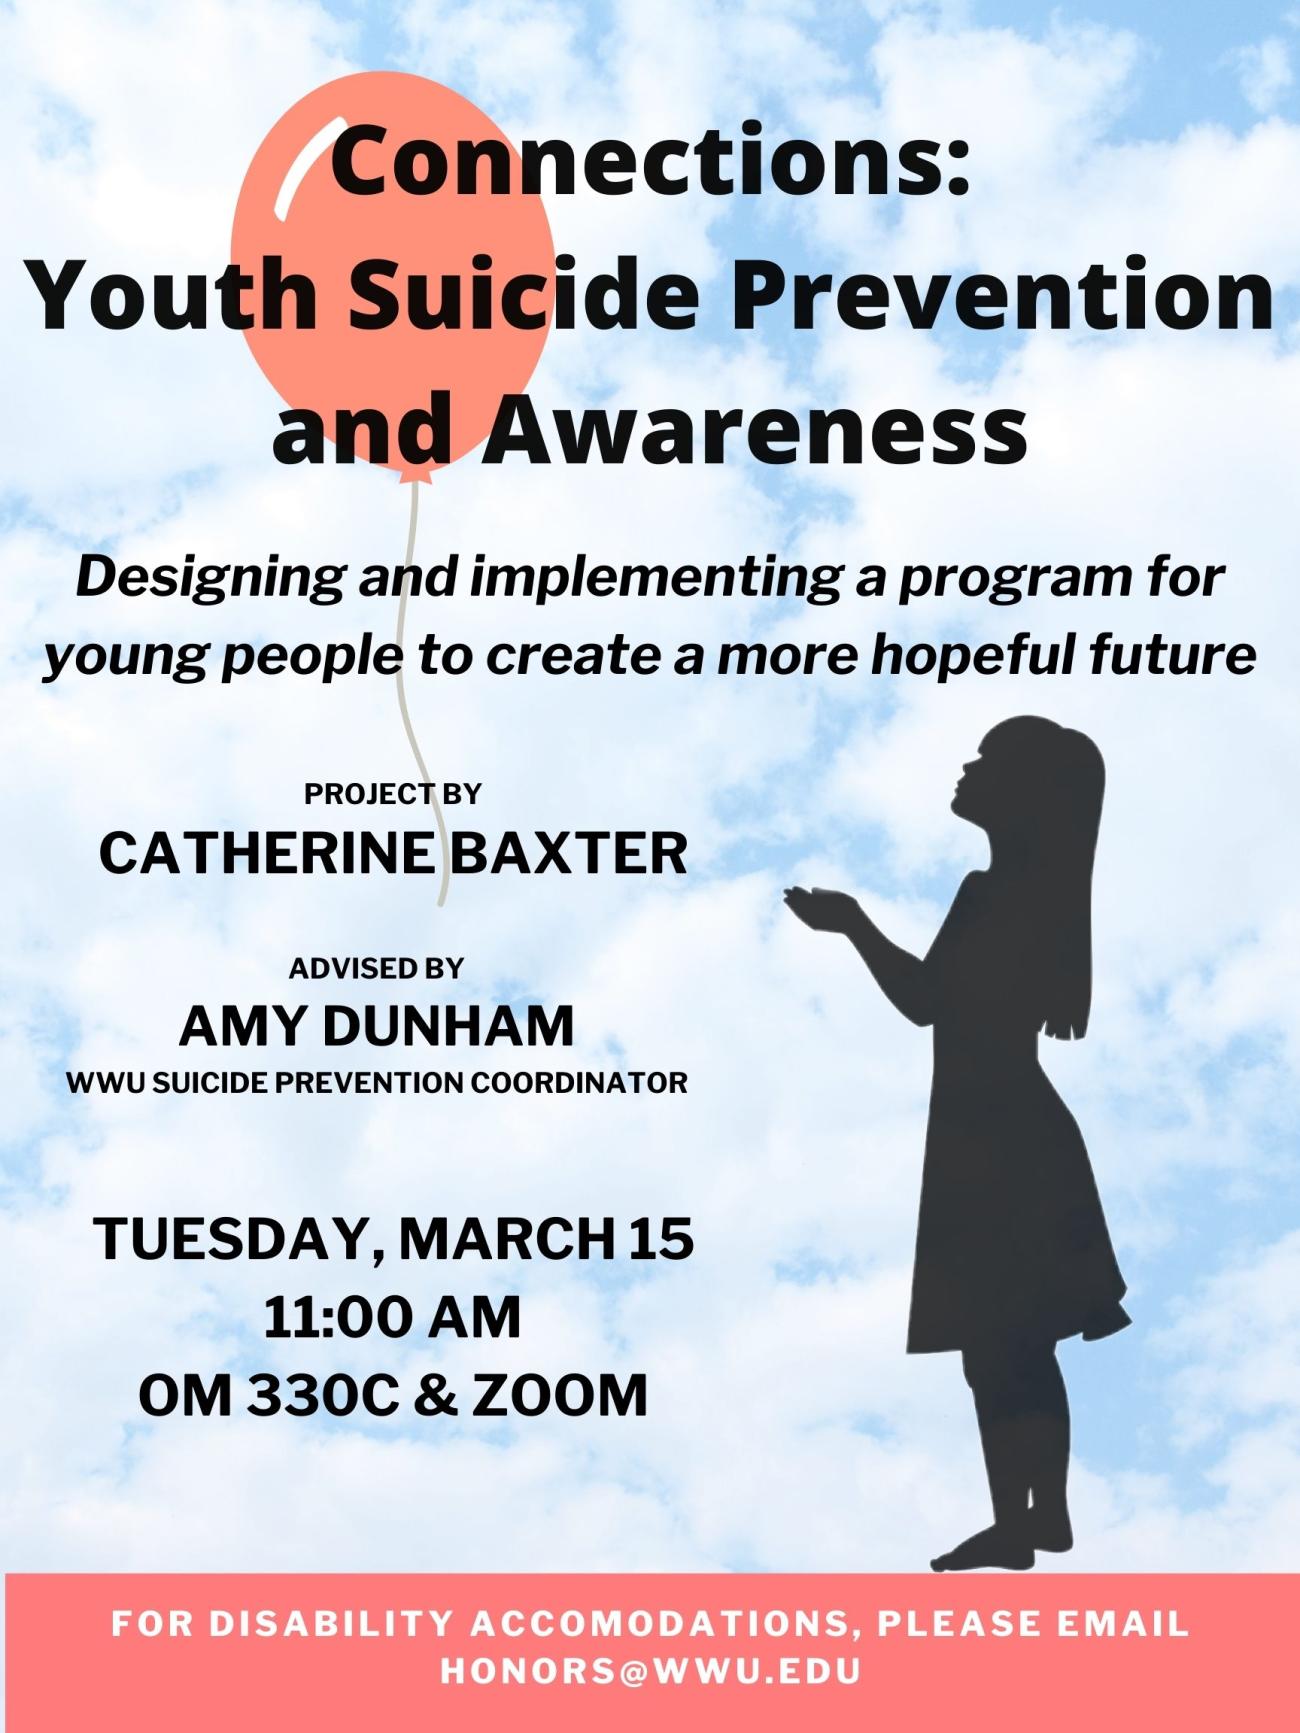 A poster with a sky background and a girl’s silhouette holding a rising red balloon. The text reads: "Connections: Youth Suicide Prevention and Awareness. Designing and implementing a program for young people to create a more hopeful future. Project by Catherine Baxter and advised by Amy Dunham, Western Washington University Suicide Prevention Coordinator. On Tuesday, March 15th at 11:00 AM in Old Main 330C or on Zoom. For disability accommodations, please email honors@wwu.edu."